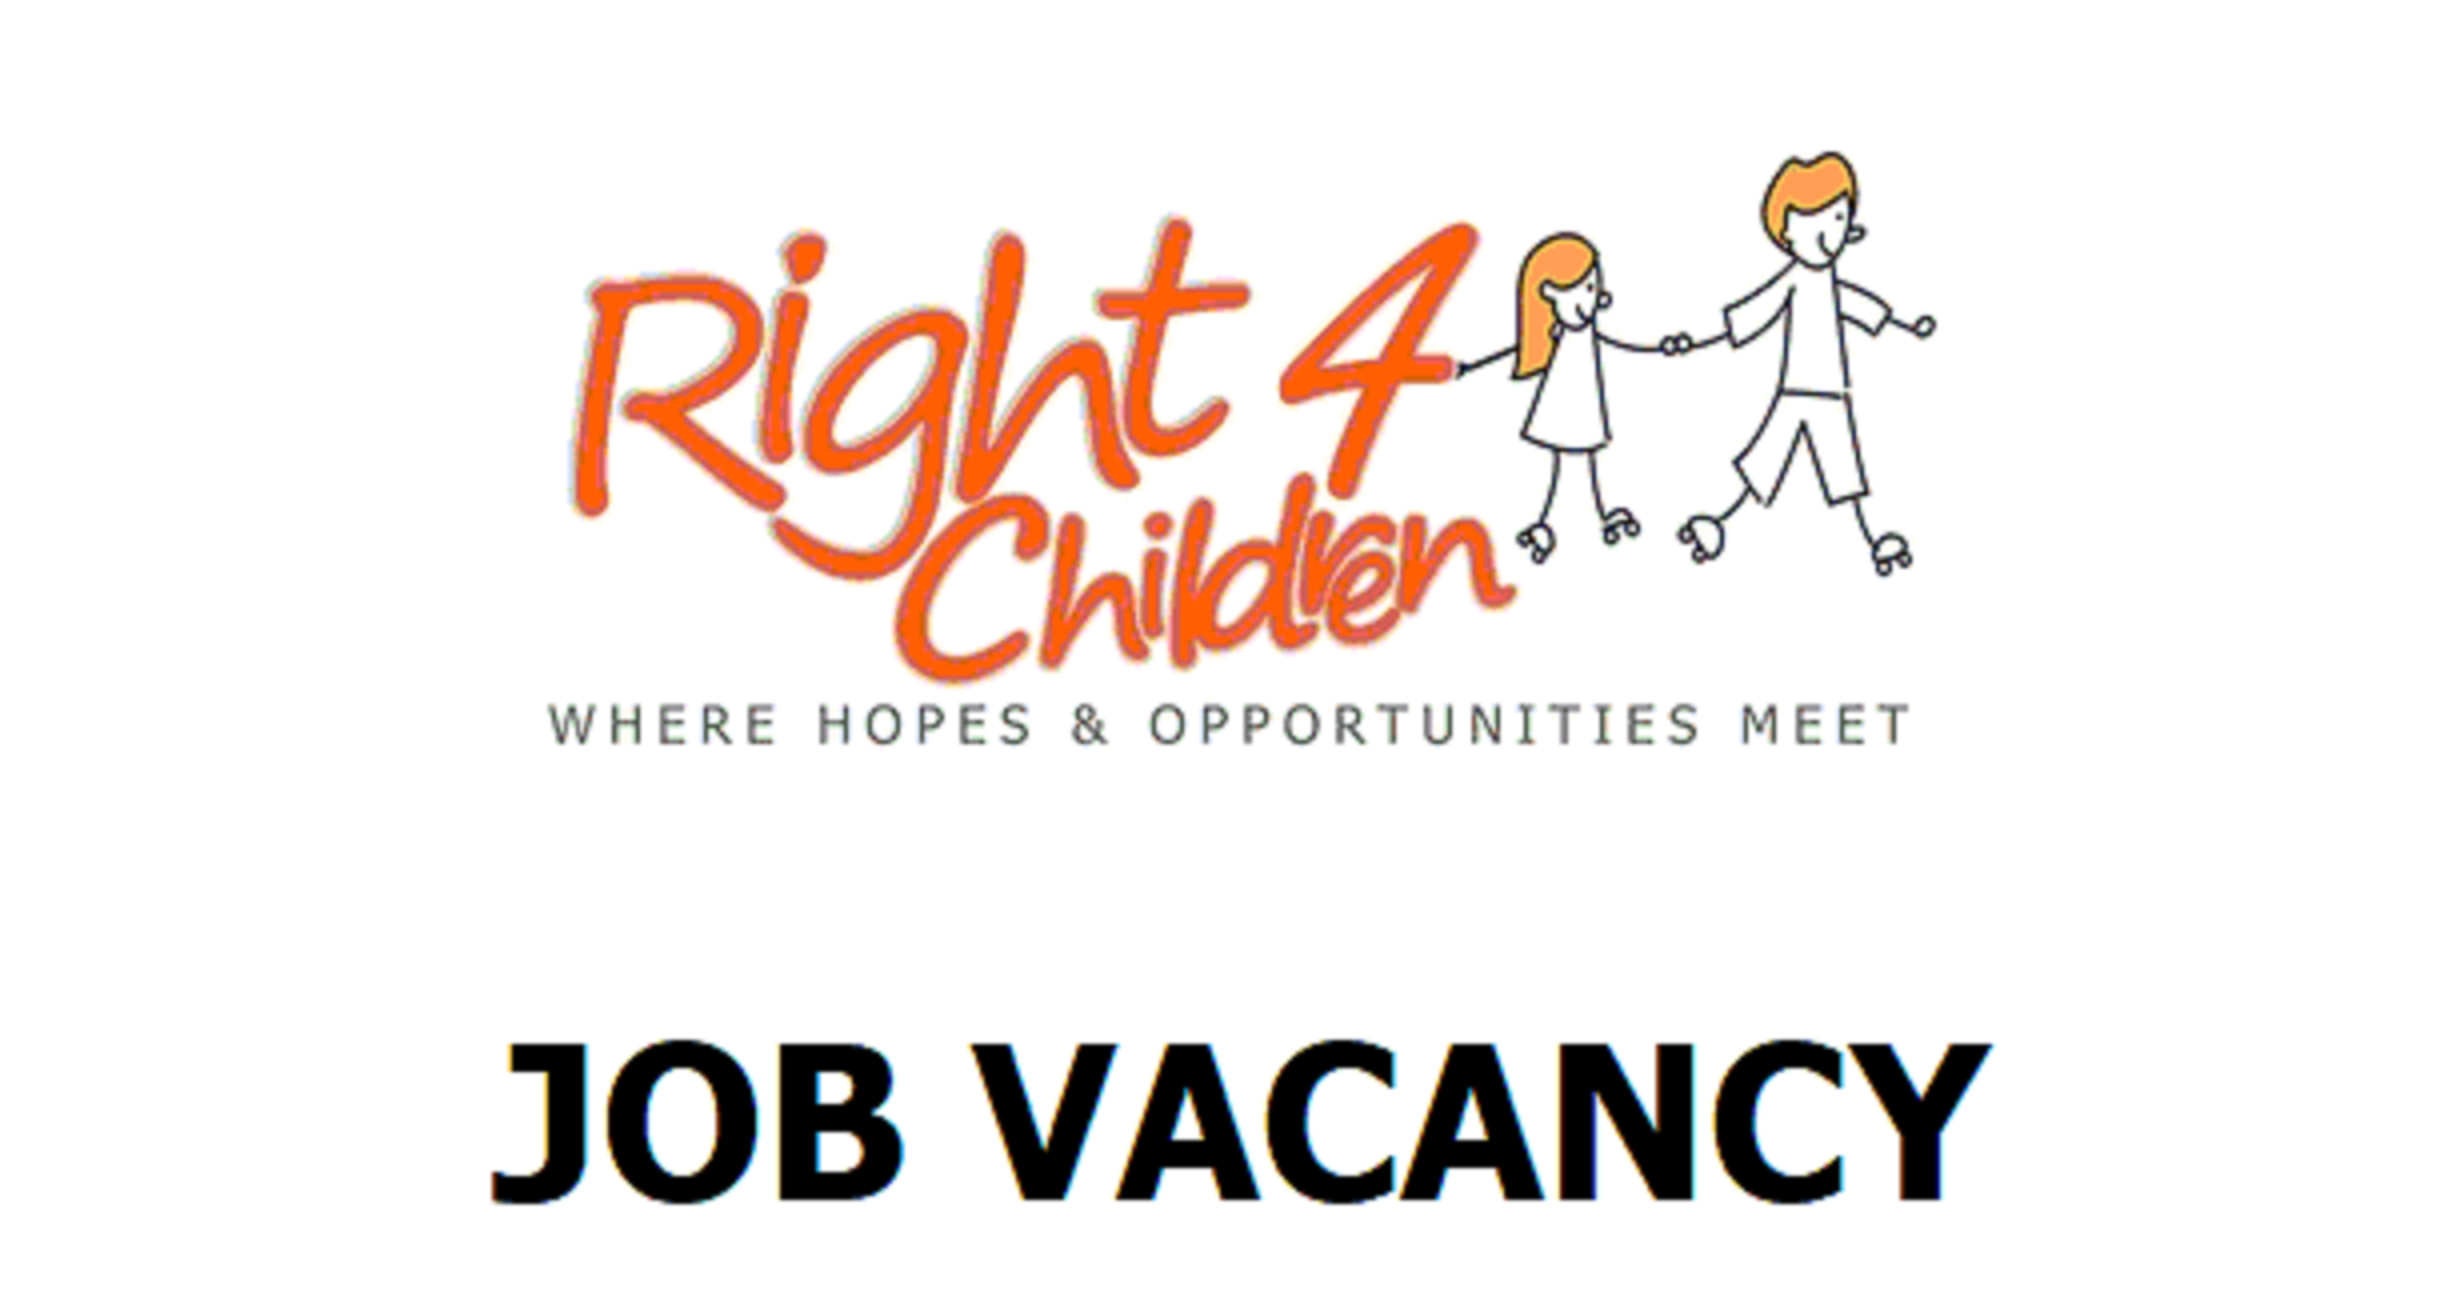 VaRight4Children Job Vacancy for Training Facilitatorscancy Announcement from Max Media for Various Positions